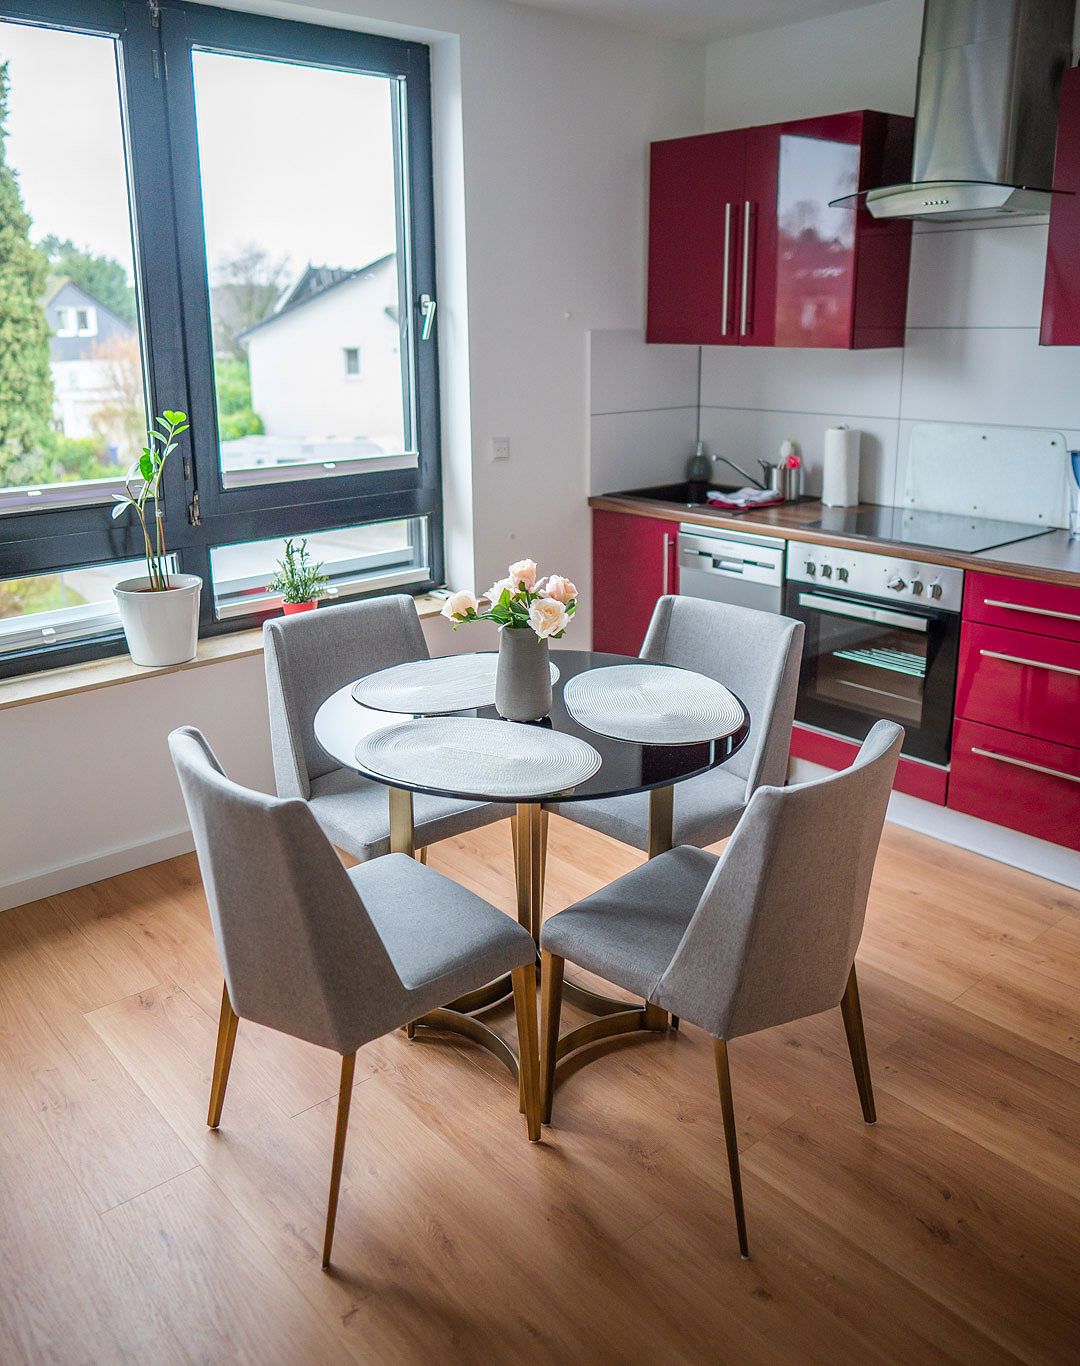 New & great flat in the heart of town